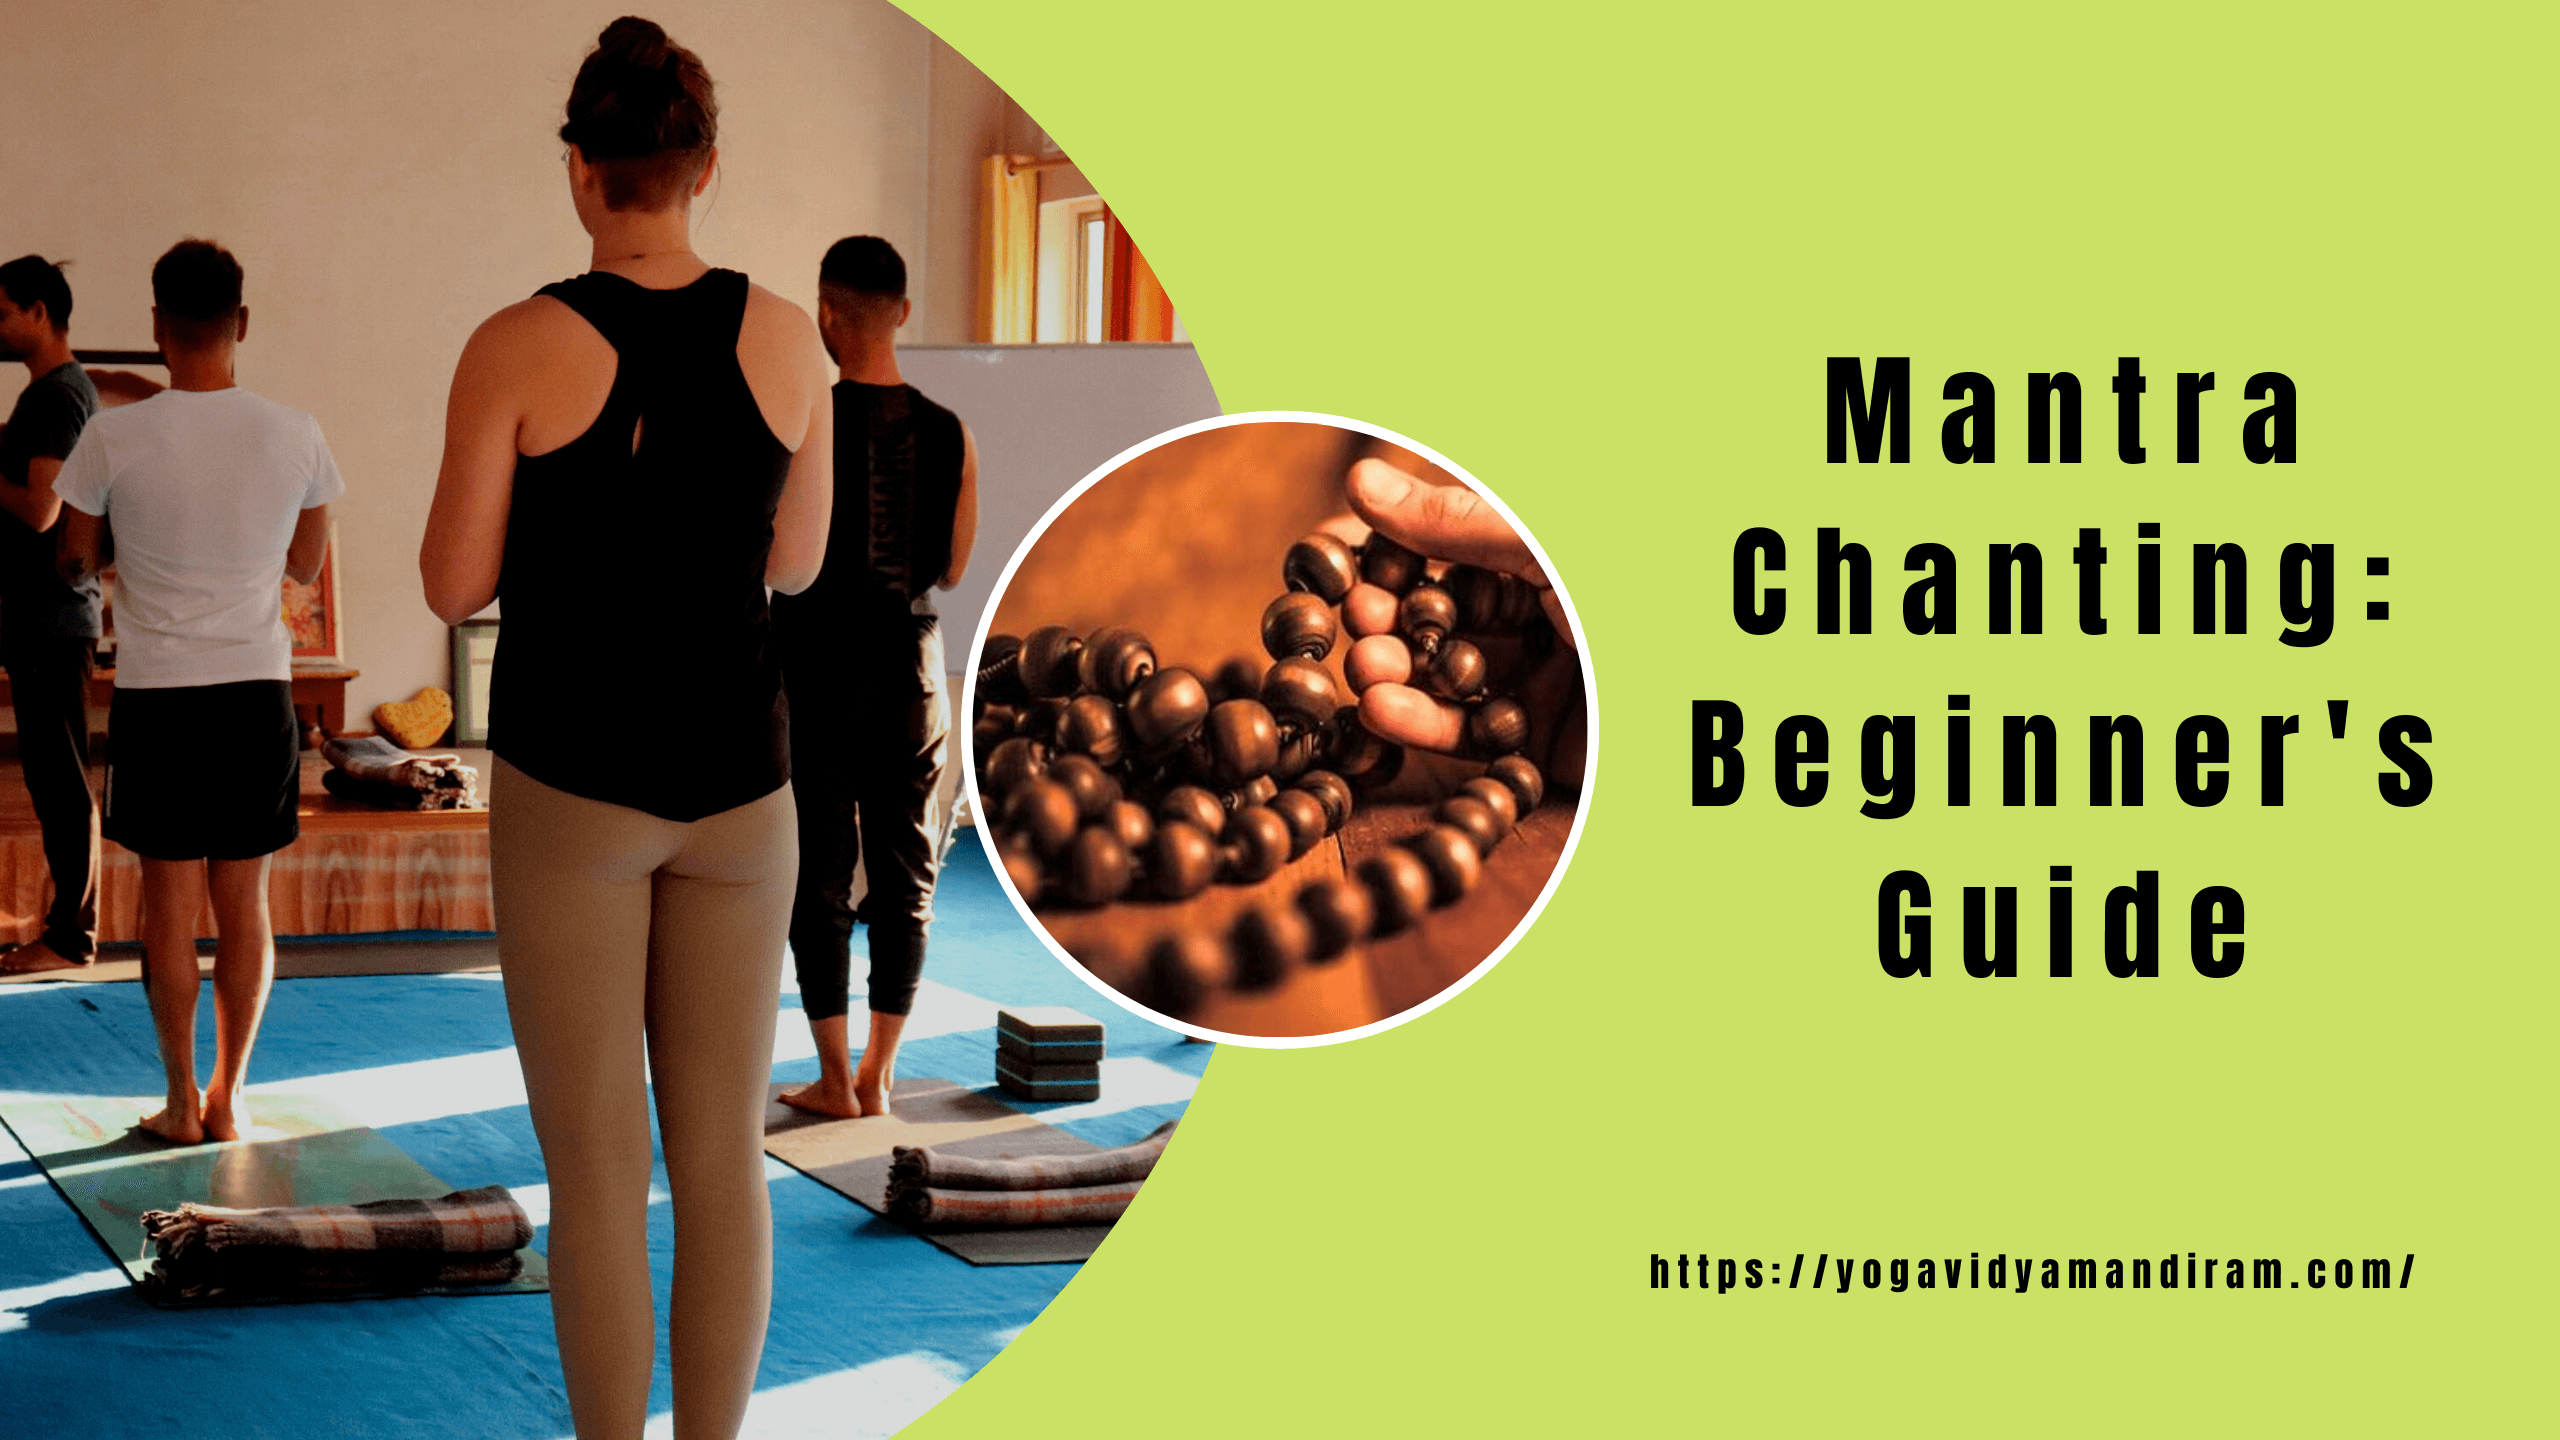 Mantra Chanting: Beginner's Guide